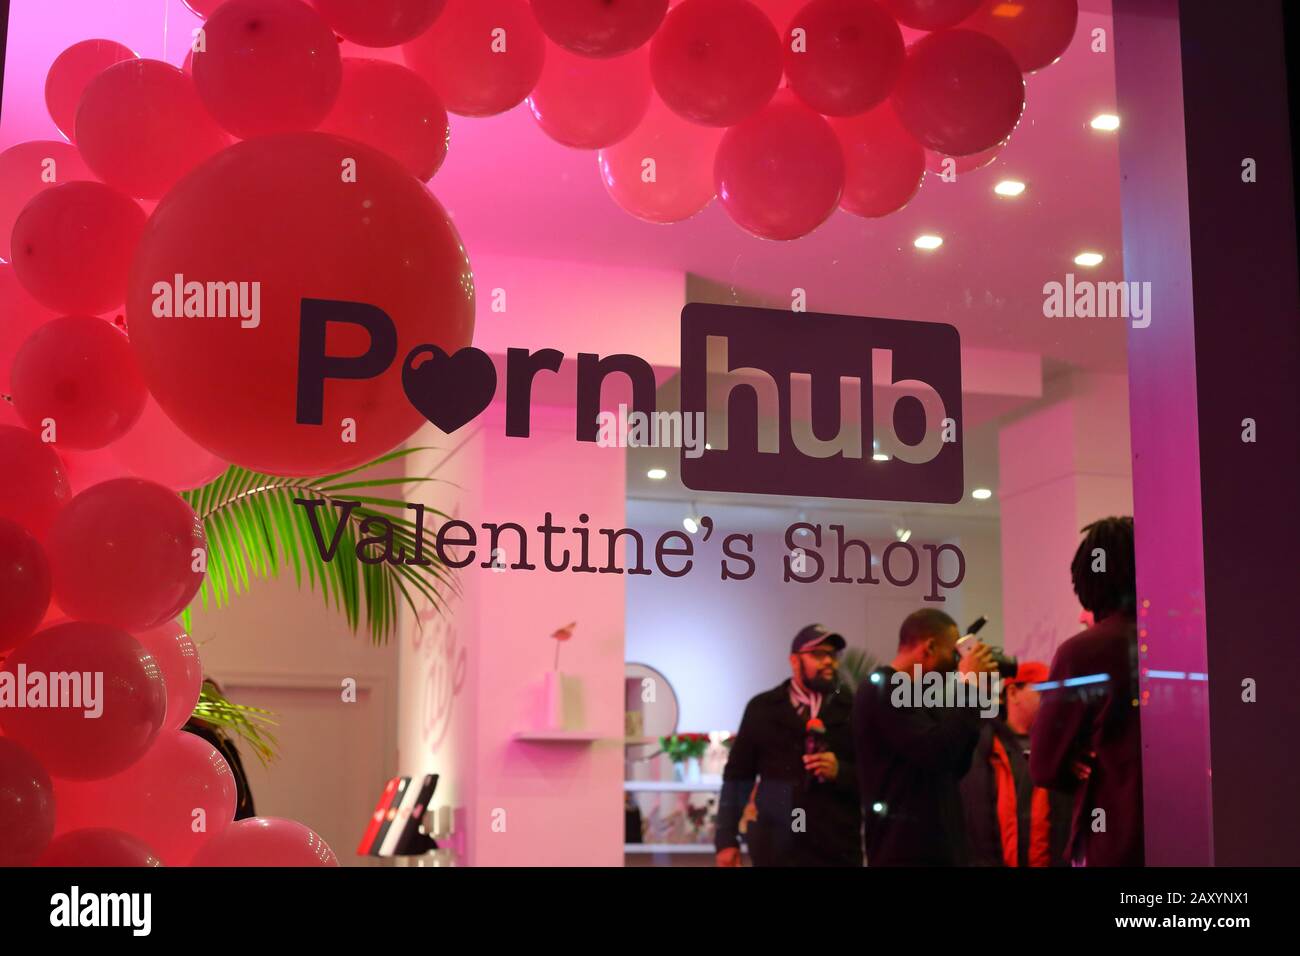 [historical storefront] Pornhub Valentine's Shop, 91 Allen St, NYC storefront photo of an adult entertainment pop-up in the Lower East Side February 2 Stock Photo